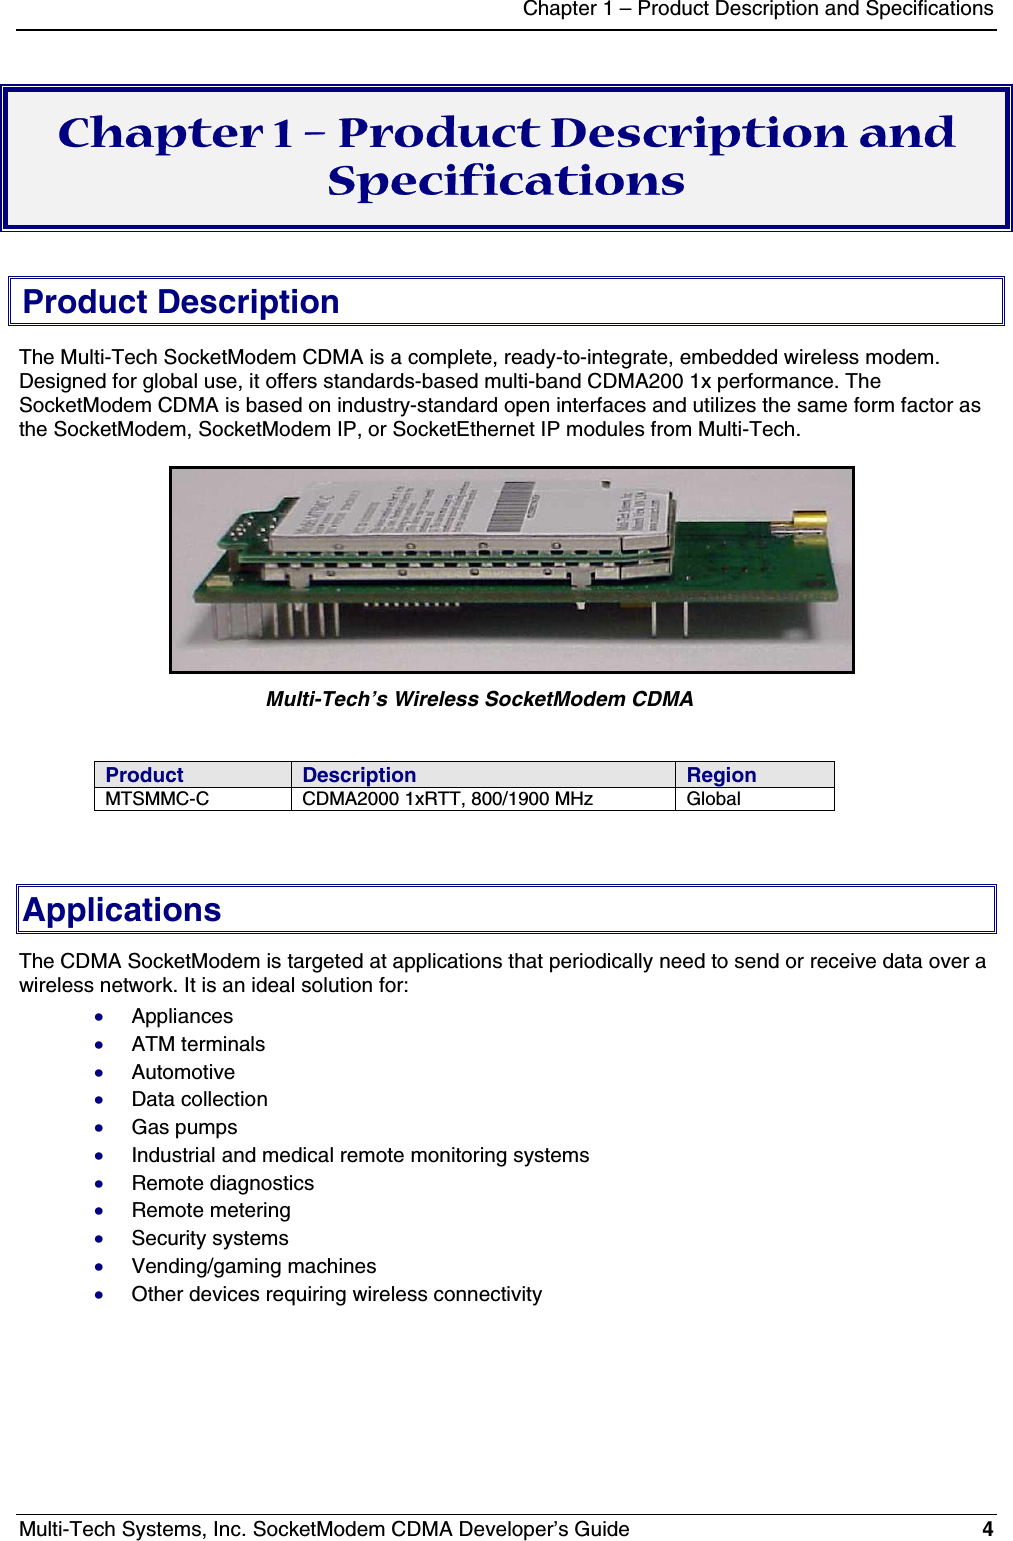 Chapter 1 – Product Description and SpecificationsMulti-Tech Systems, Inc. SocketModem CDMA Developer’s Guide 4Chapter 1 – Product Description andSpecificationsProduct DescriptionThe Multi-Tech SocketModem CDMA is a complete, ready-to-integrate, embedded wireless modem.Designed for global use, it offers standards-based multi-band CDMA200 1x performance. TheSocketModem CDMA is based on industry-standard open interfaces and utilizes the same form factor asthe SocketModem, SocketModem IP, or SocketEthernet IP modules from Multi-Tech.               Multi-Tech’s Wireless SocketModem CDMAProduct Description RegionMTSMMC-C CDMA2000 1xRTT, 800/1900 MHz GlobalApplicationsThe CDMA SocketModem is targeted at applications that periodically need to send or receive data over awireless network. It is an ideal solution for:· Appliances· ATM terminals· Automotive· Data collection· Gas pumps· Industrial and medical remote monitoring systems· Remote diagnostics· Remote metering· Security systems· Vending/gaming machines· Other devices requiring wireless connectivity